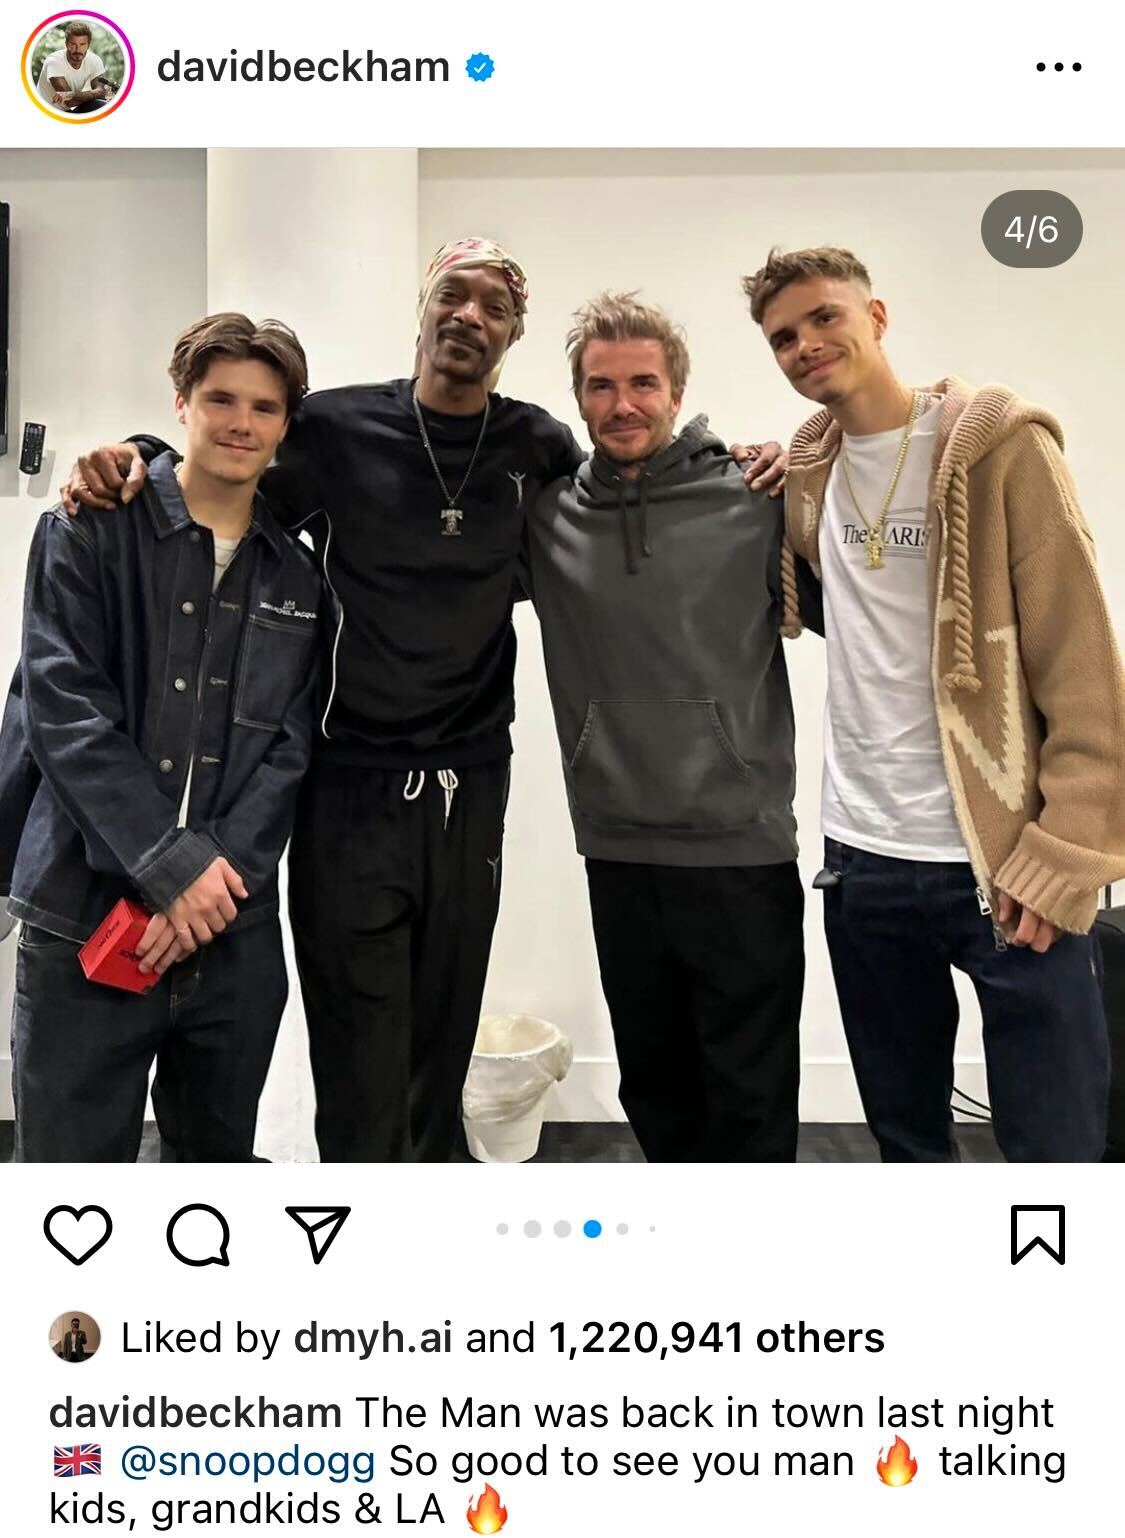 David Beckham posted a photograph of him and his sons Cruz and Romeo meeting Snoop Dogg in London